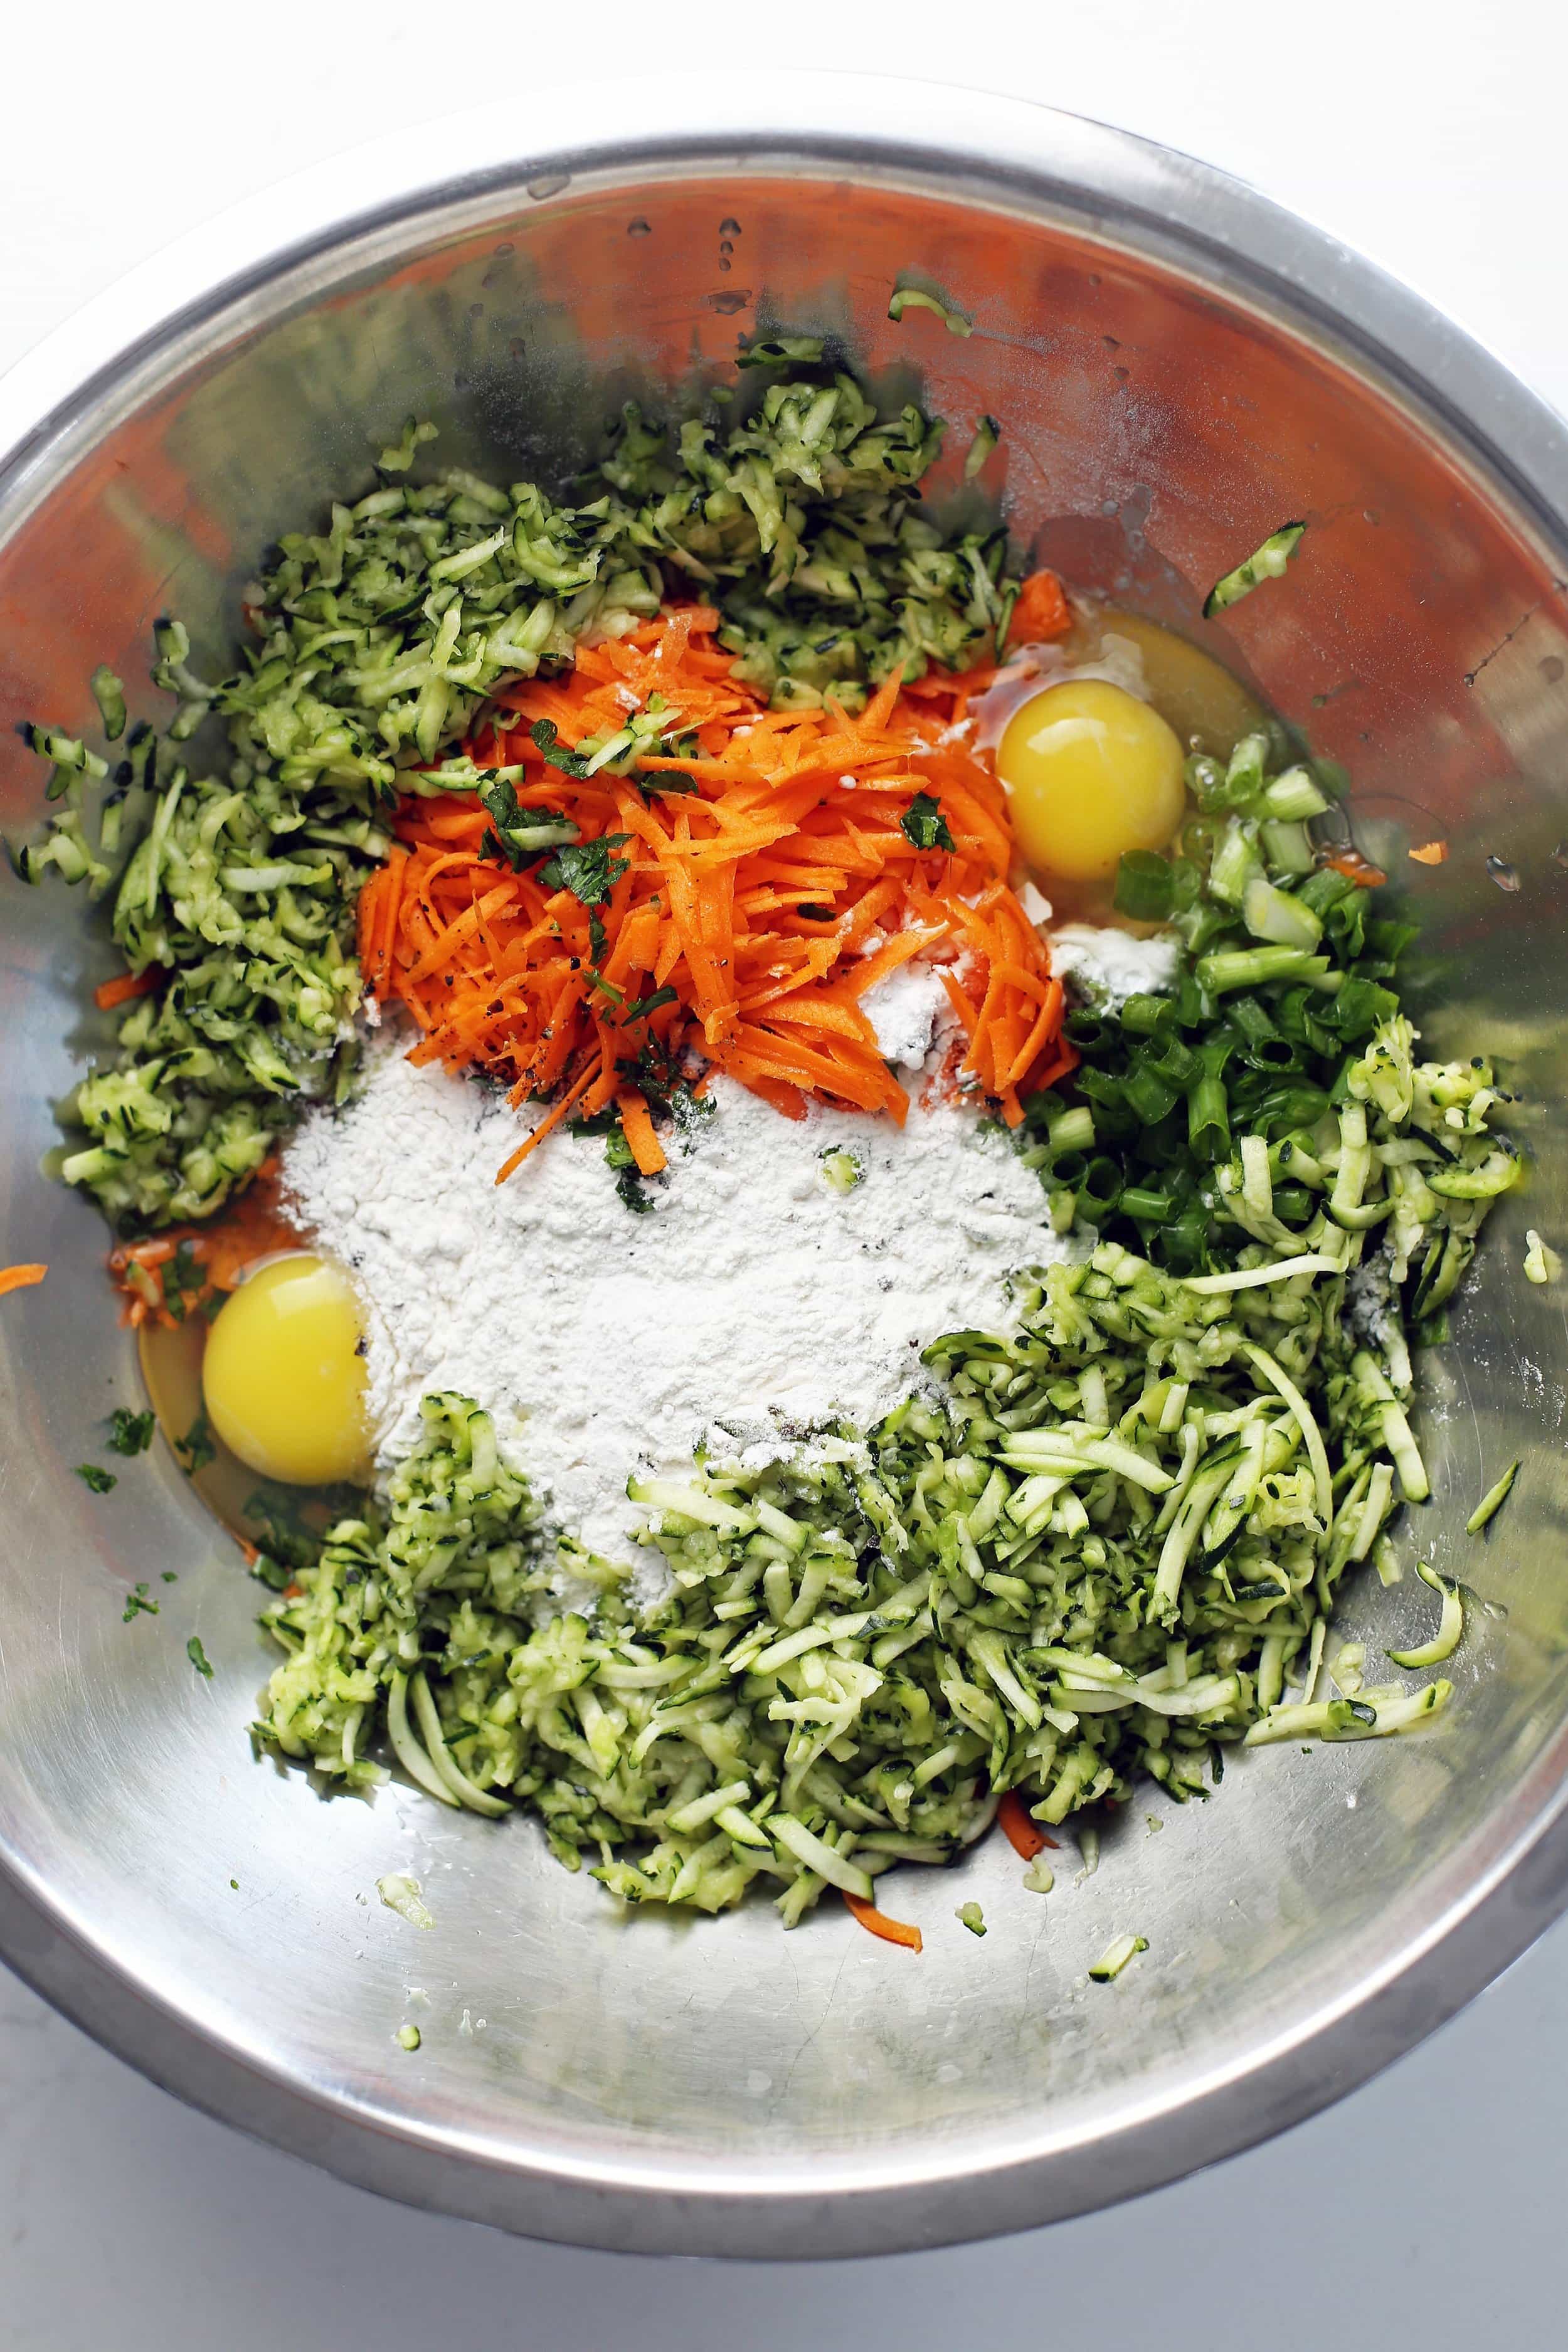 Shredded zucchini, shredded carrots, green onion, parsley, eggs, flour, baking powder, and cracked black pepper in a large stainless steel bowl.